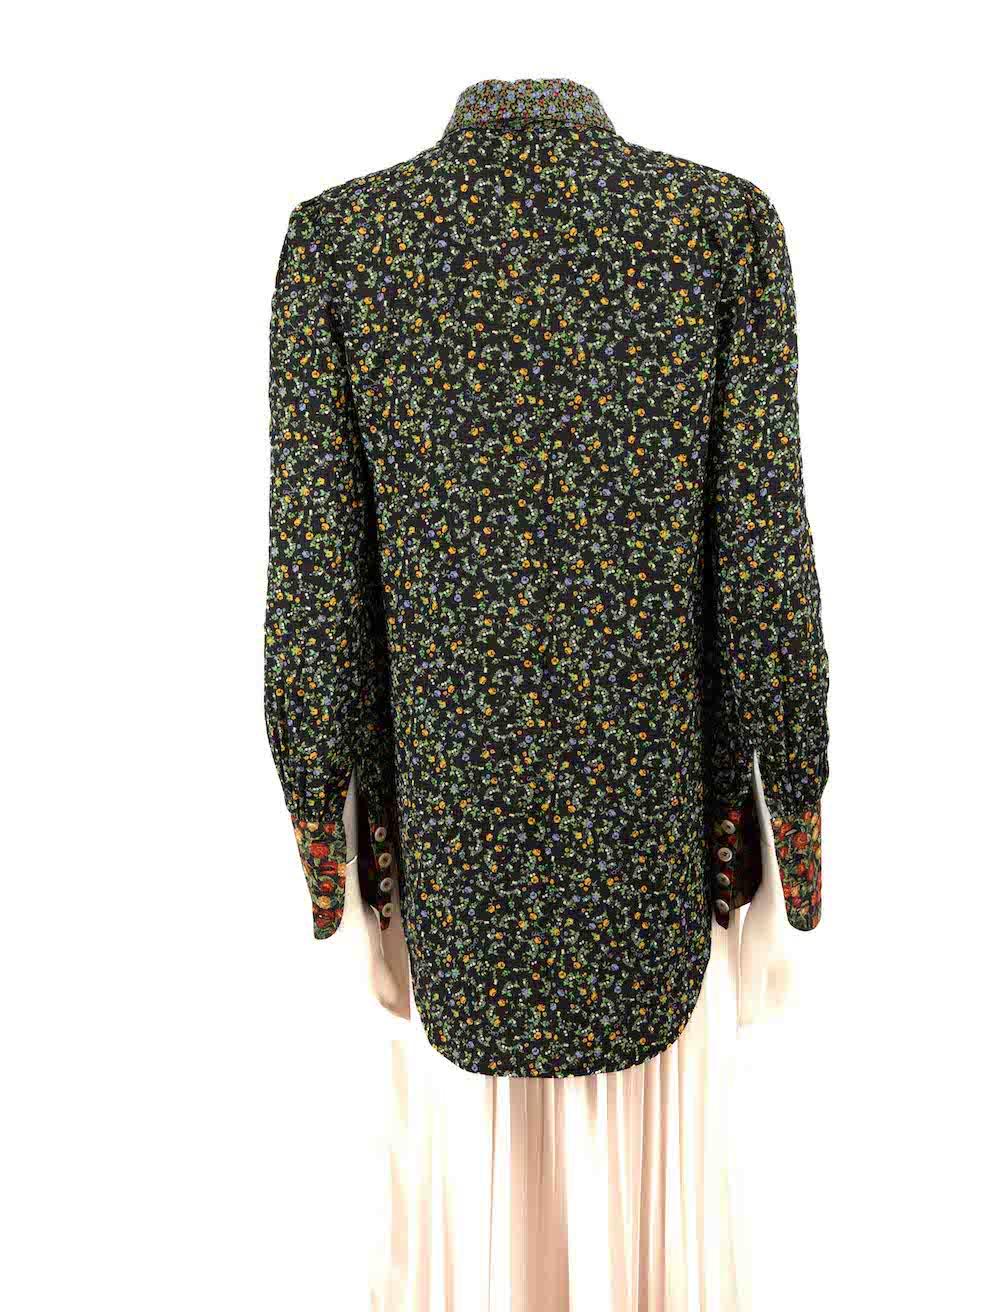 Gucci Liberty Floral Bow Detail Shirt Size XS In Good Condition For Sale In London, GB